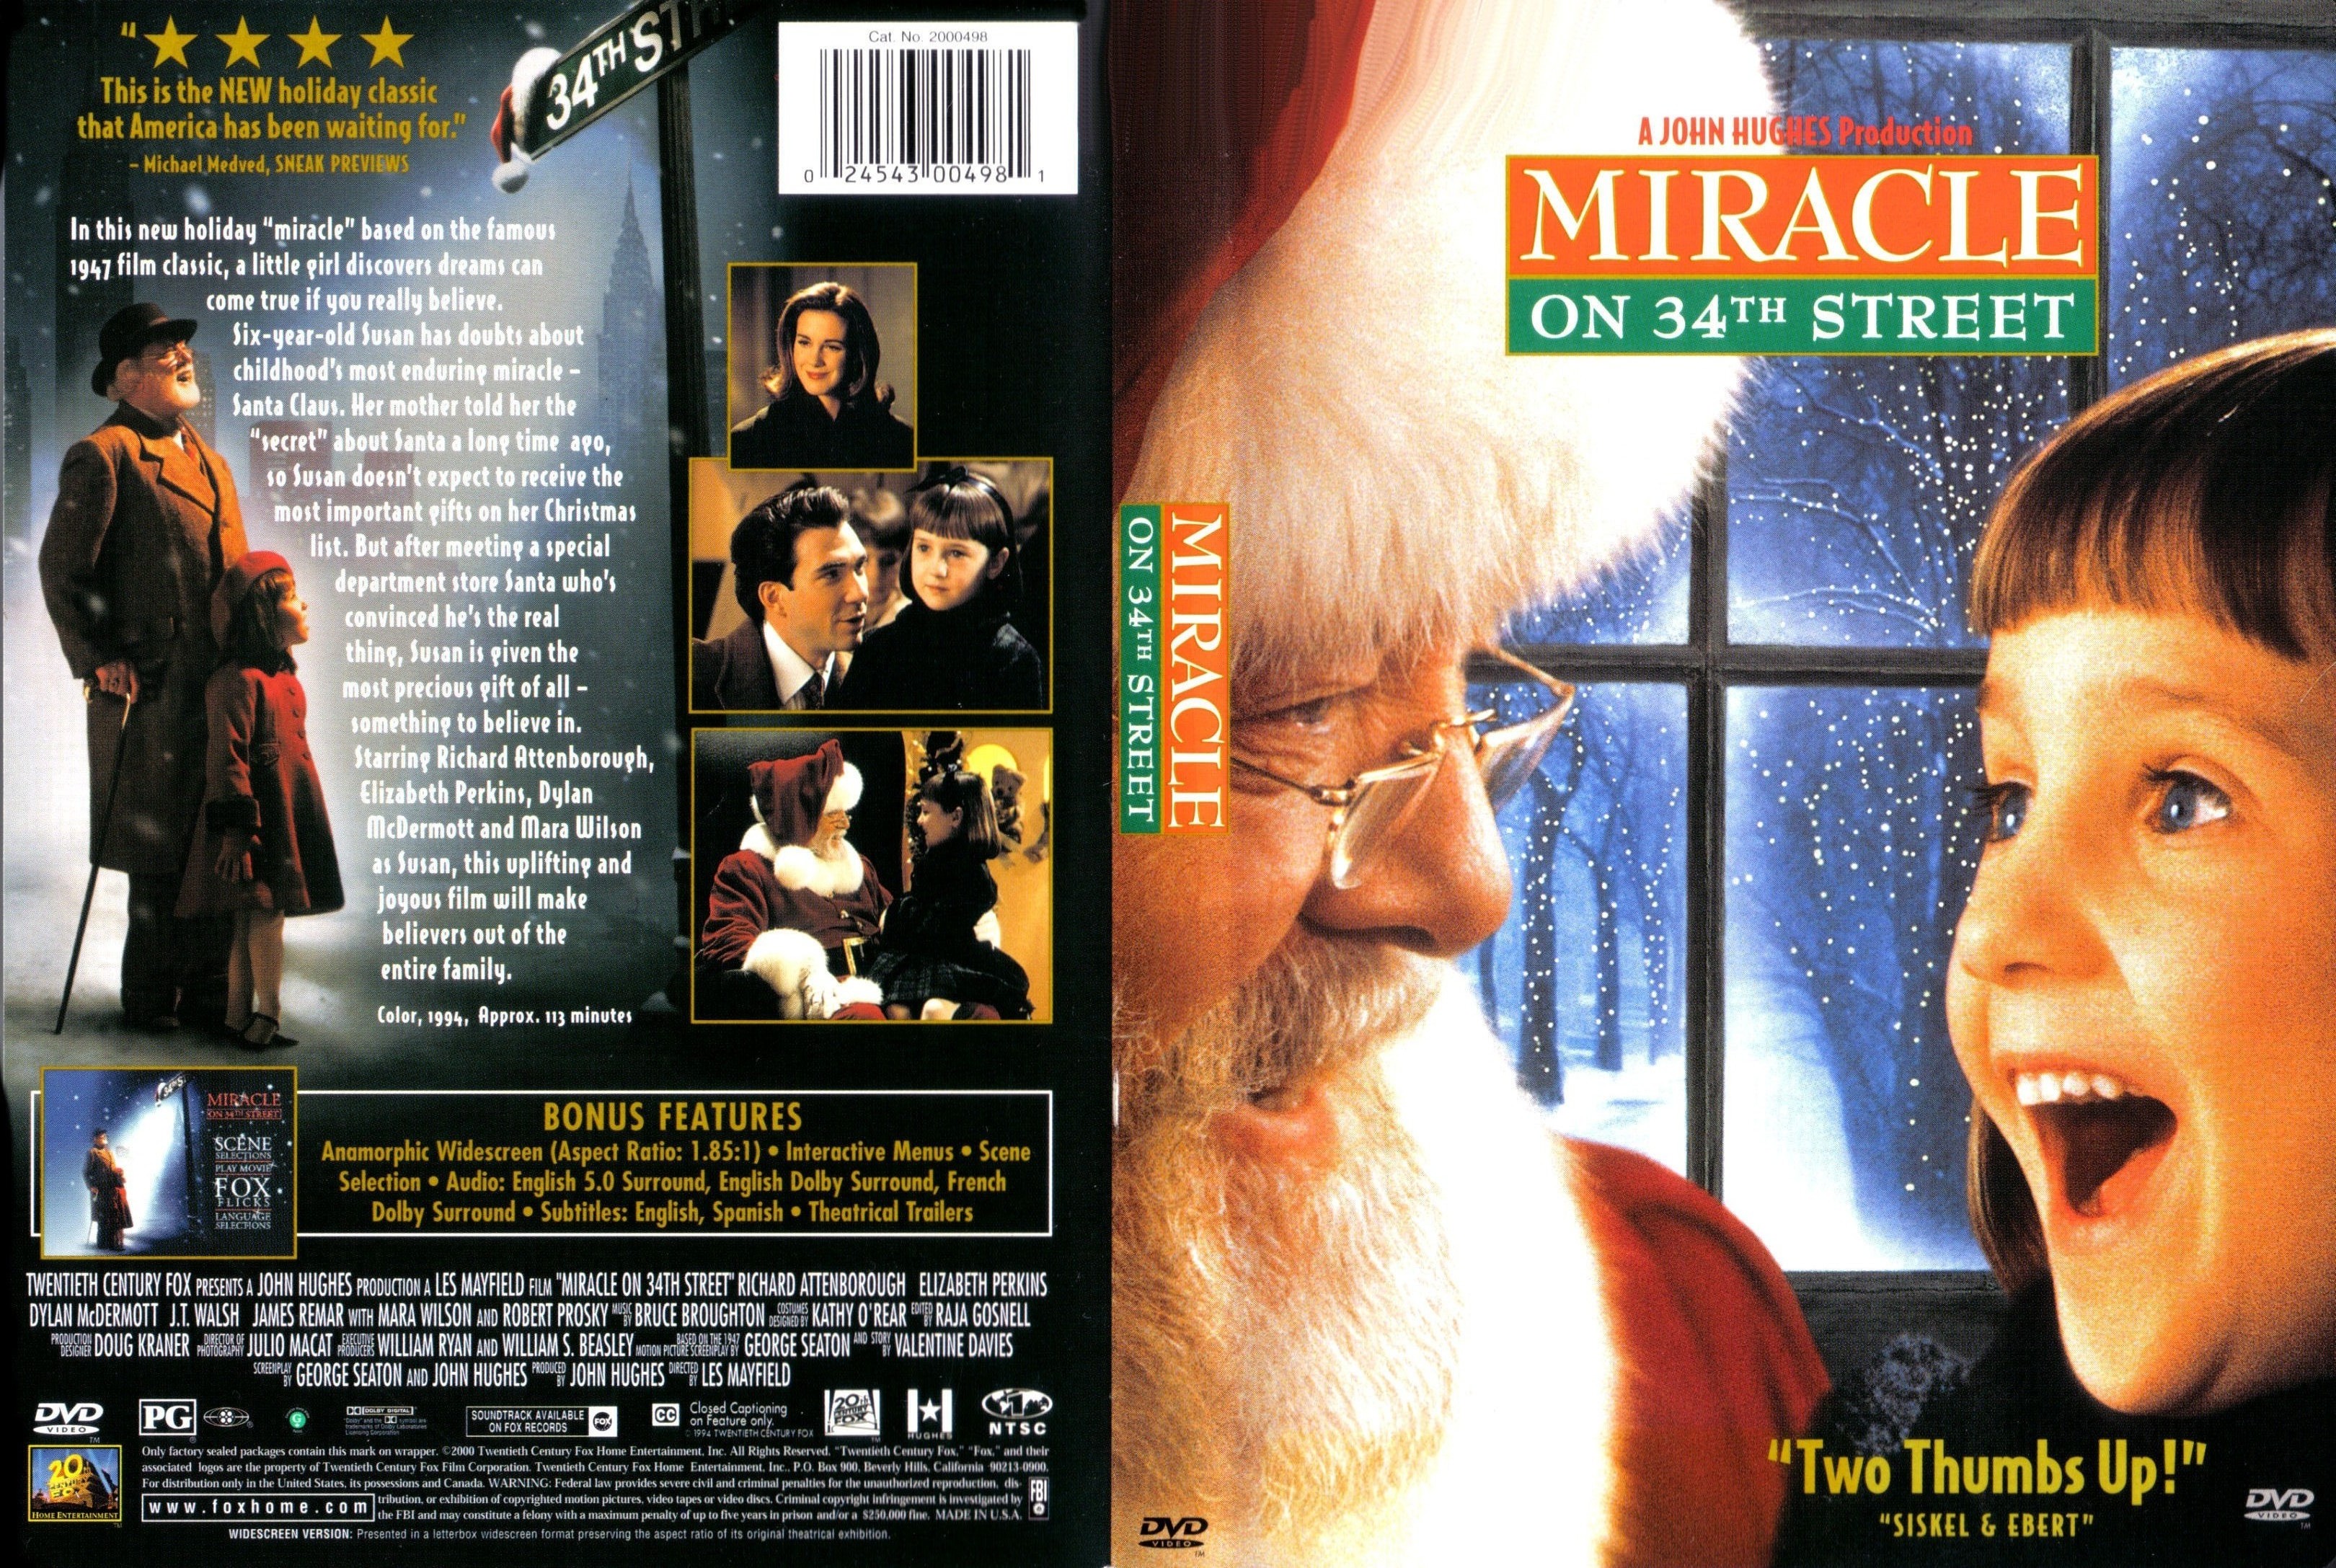 Jaquette DVD Miracle on 34th street - Miracle sur la 34 me rue (Canadienne)